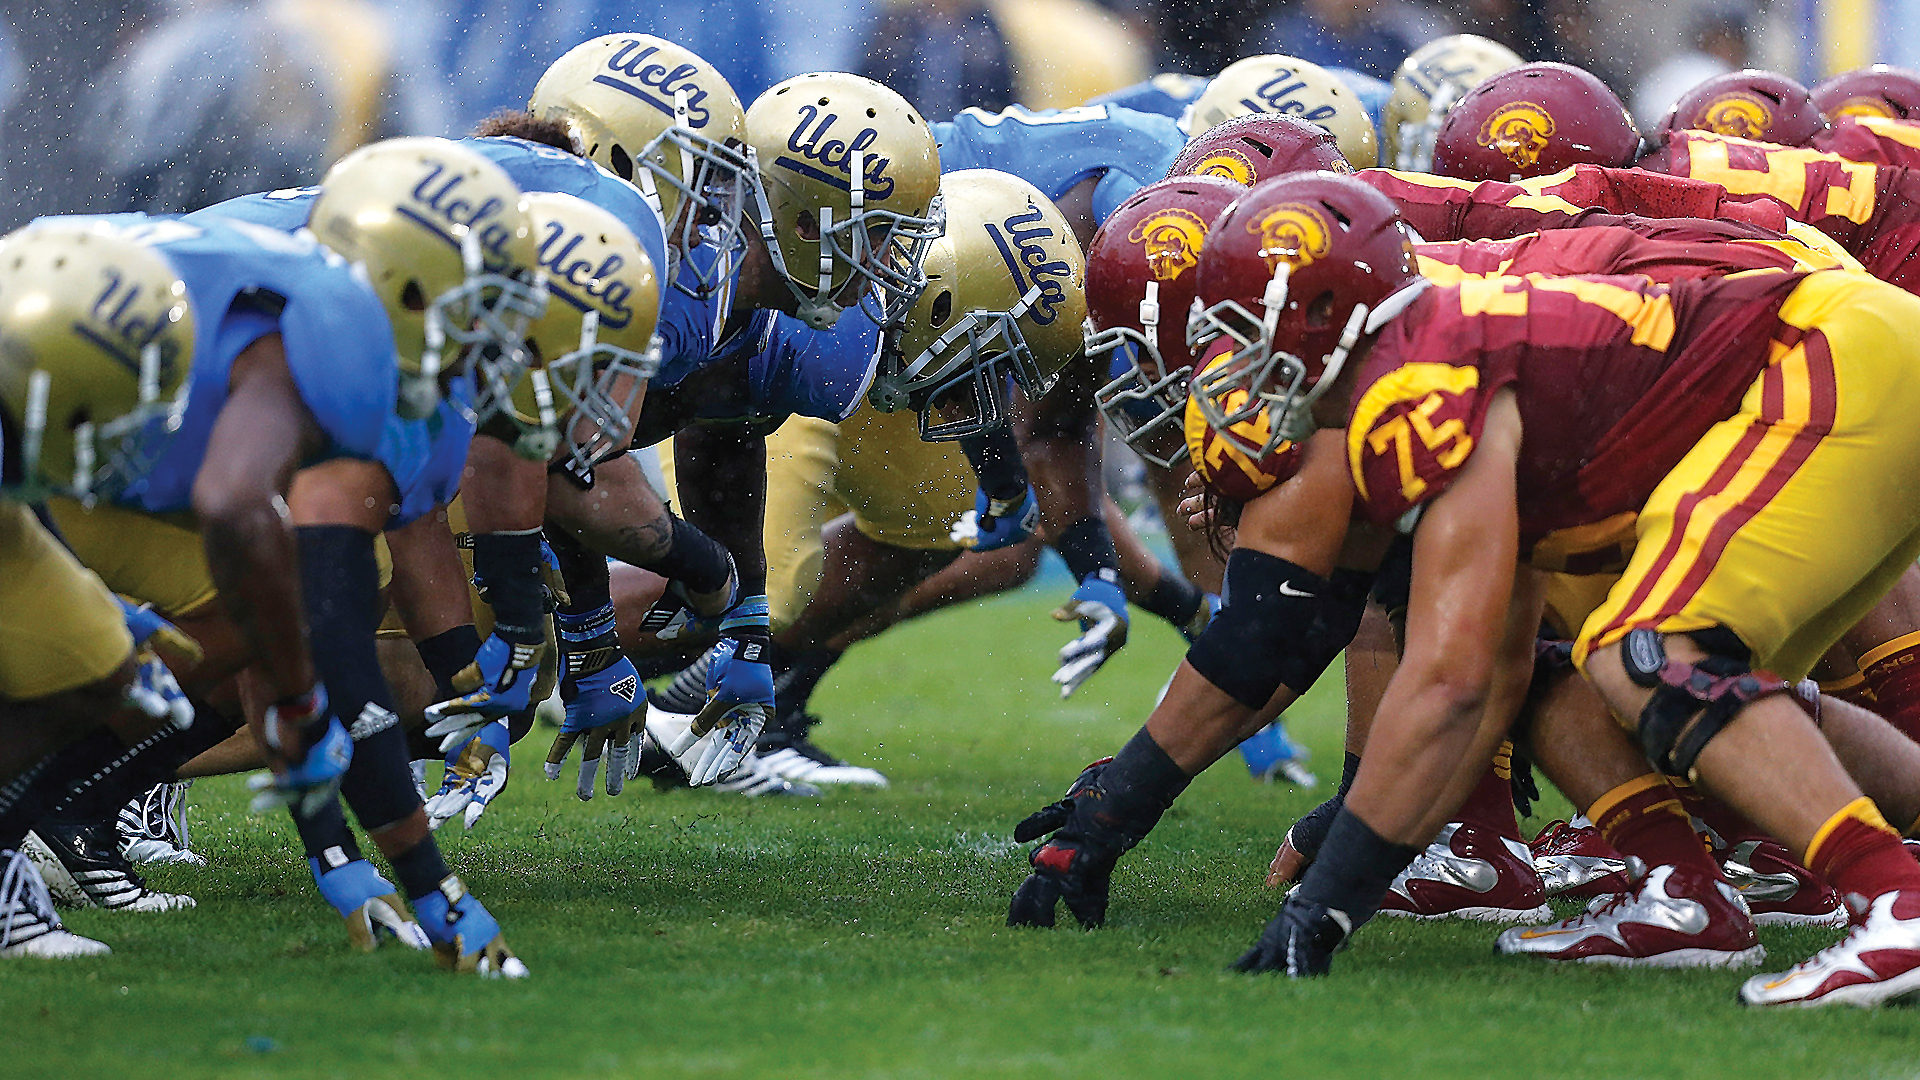 USC vs. UCLA A Cardinal and Gold Against Blue and Gold Rivalry